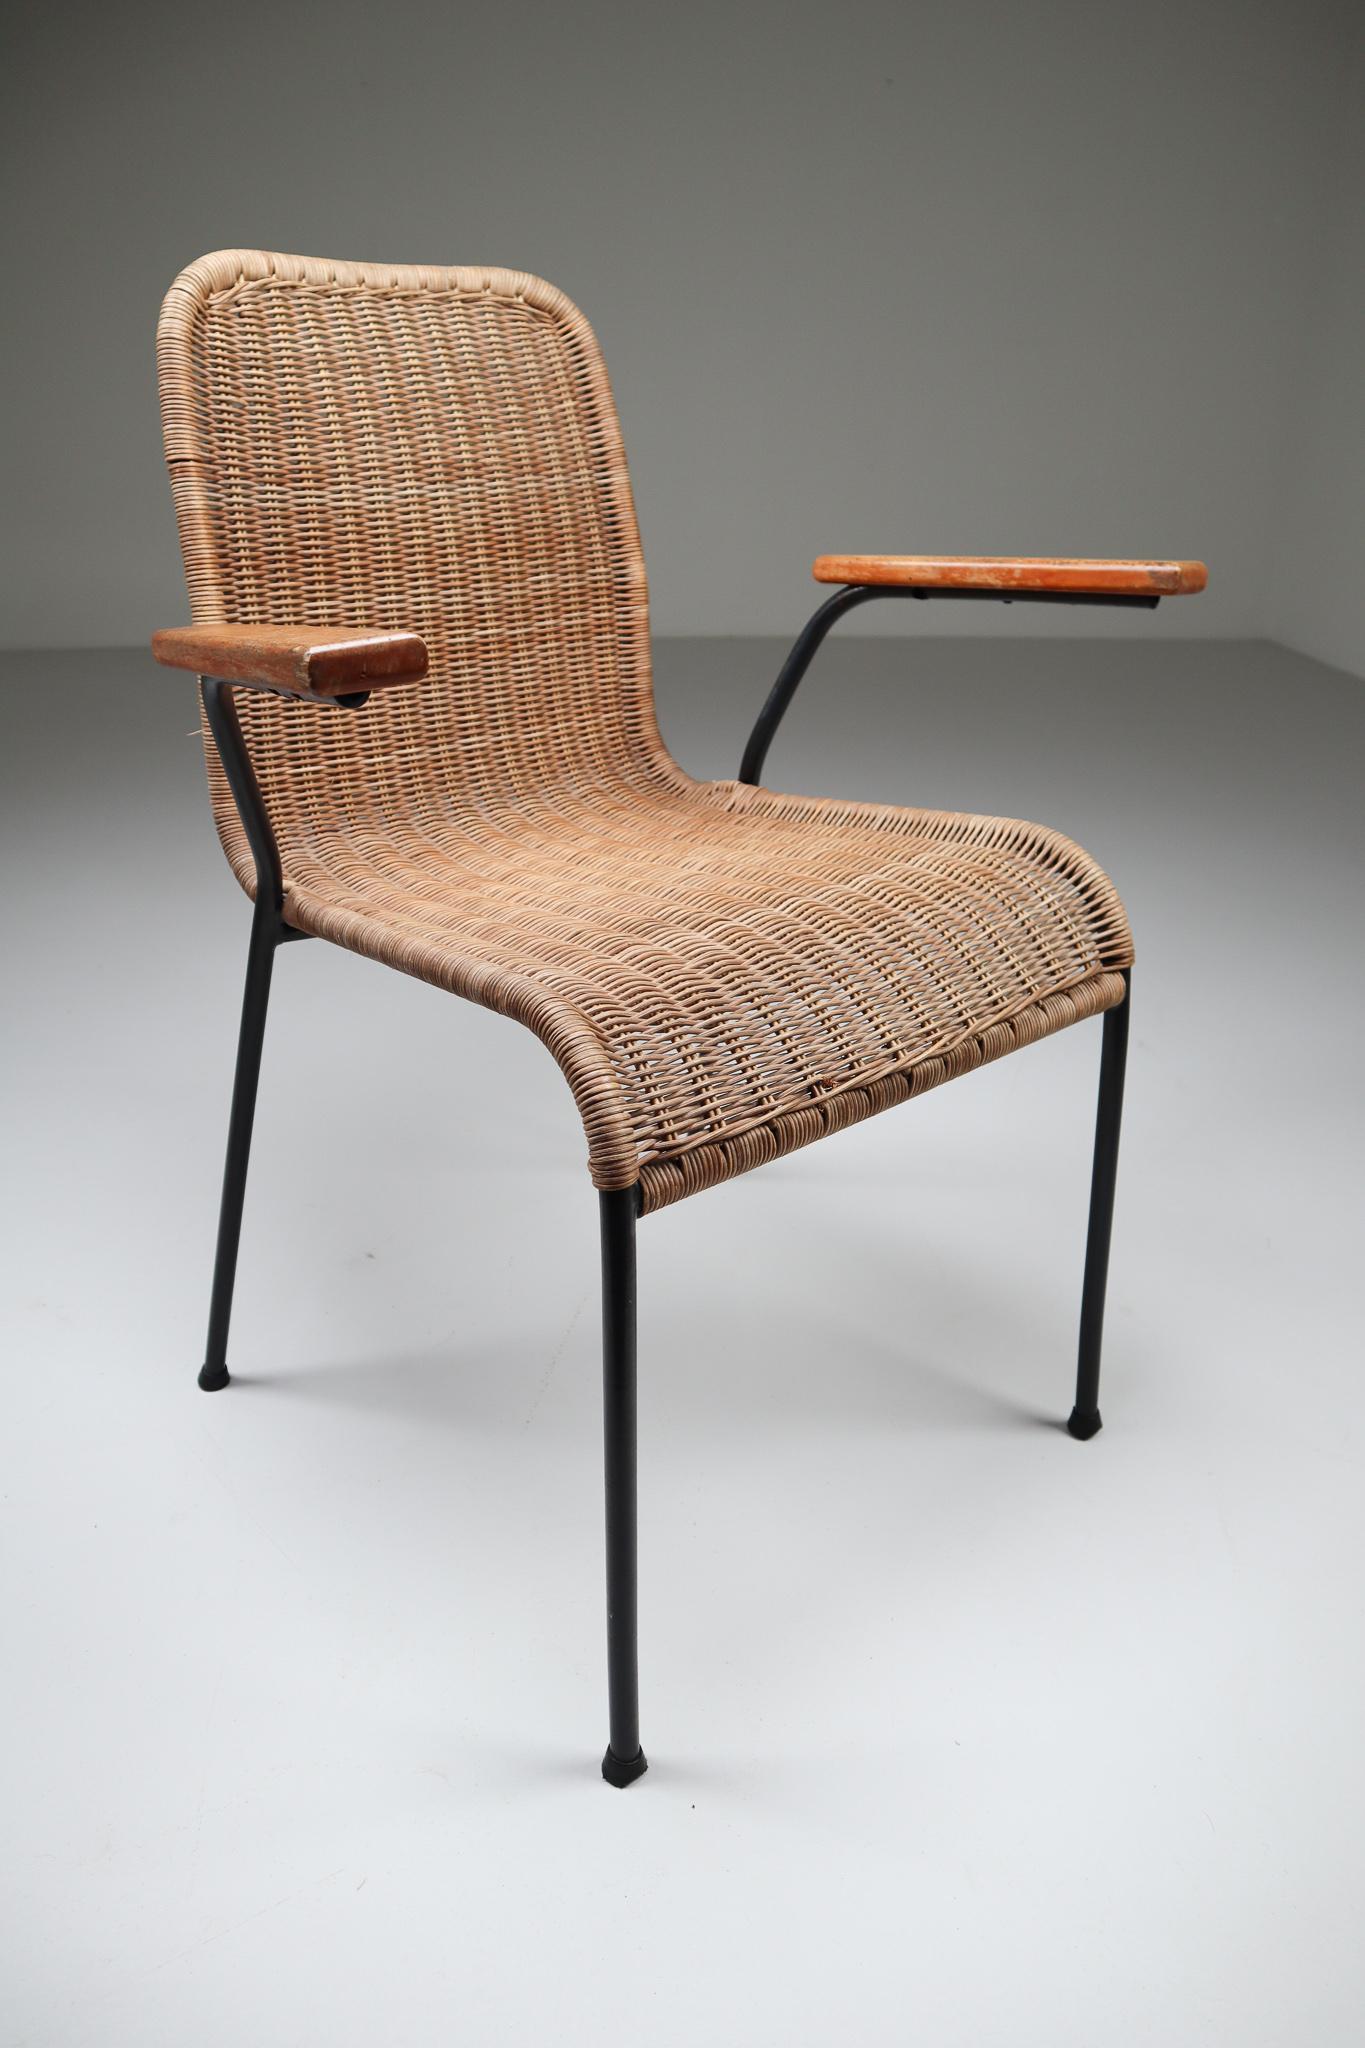 20th Century Patinated Metal Framed Armchairs with Woven Wicker Seat, The Netherlands, 1950